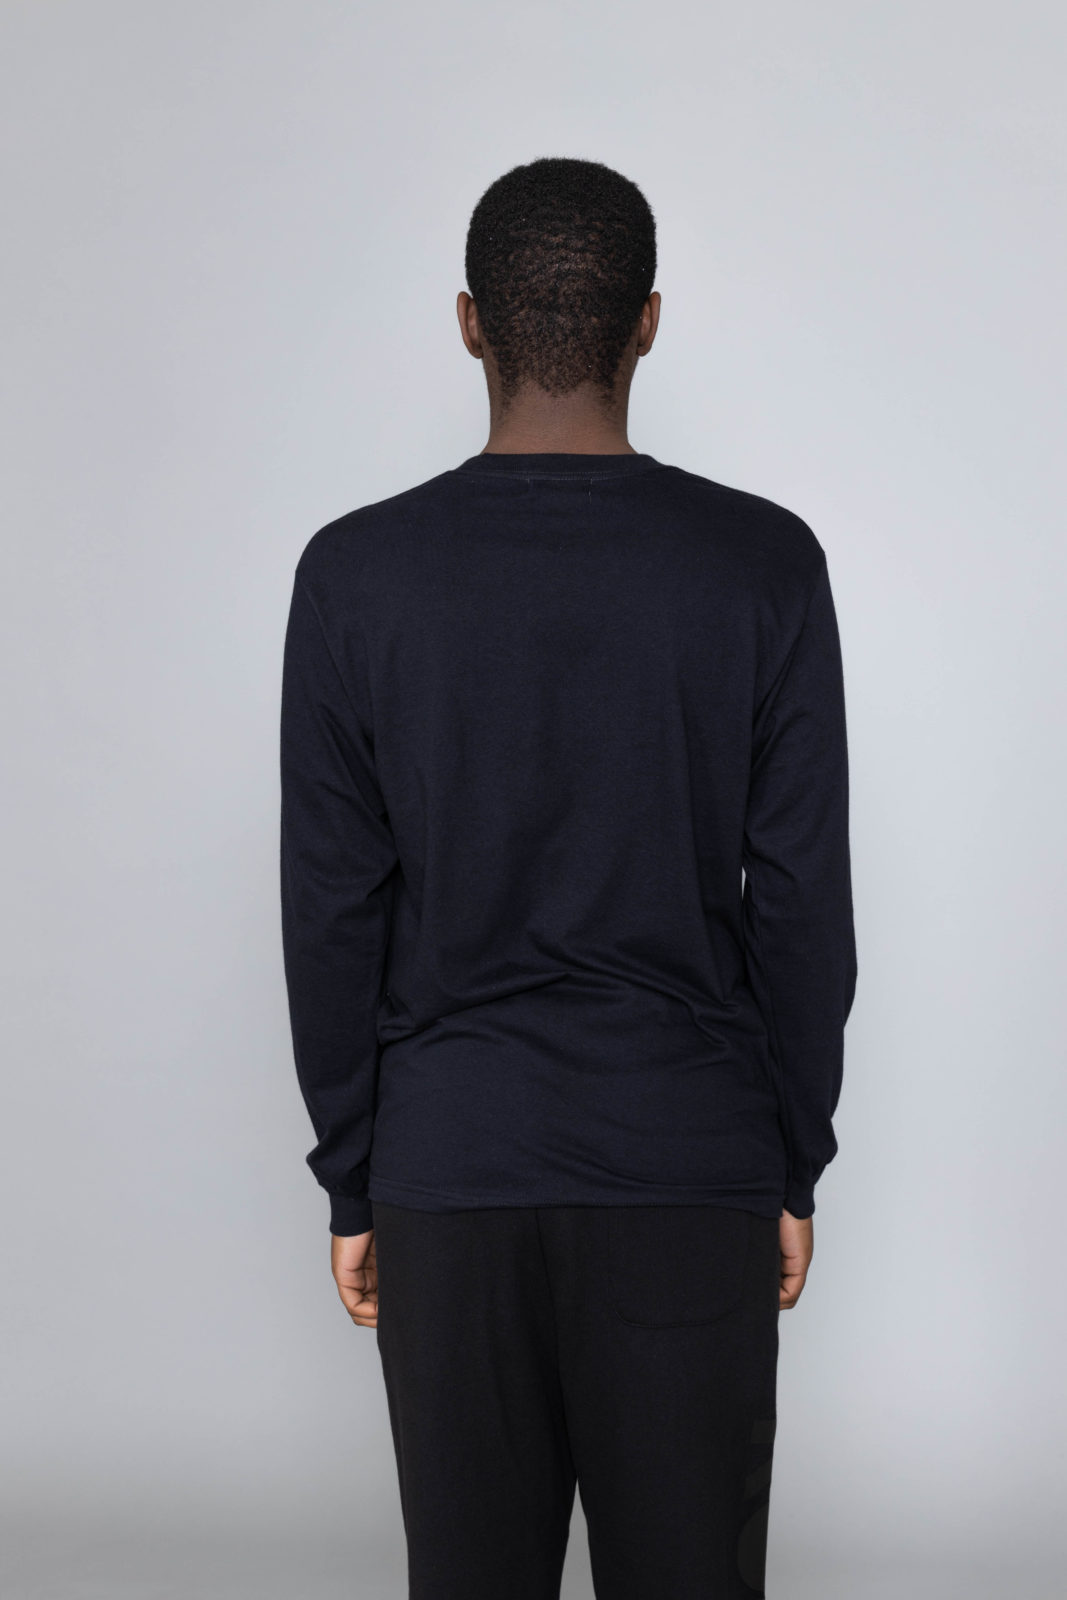 Rokit Ornament Long Sleeve Black • Centreville Store in Brussels